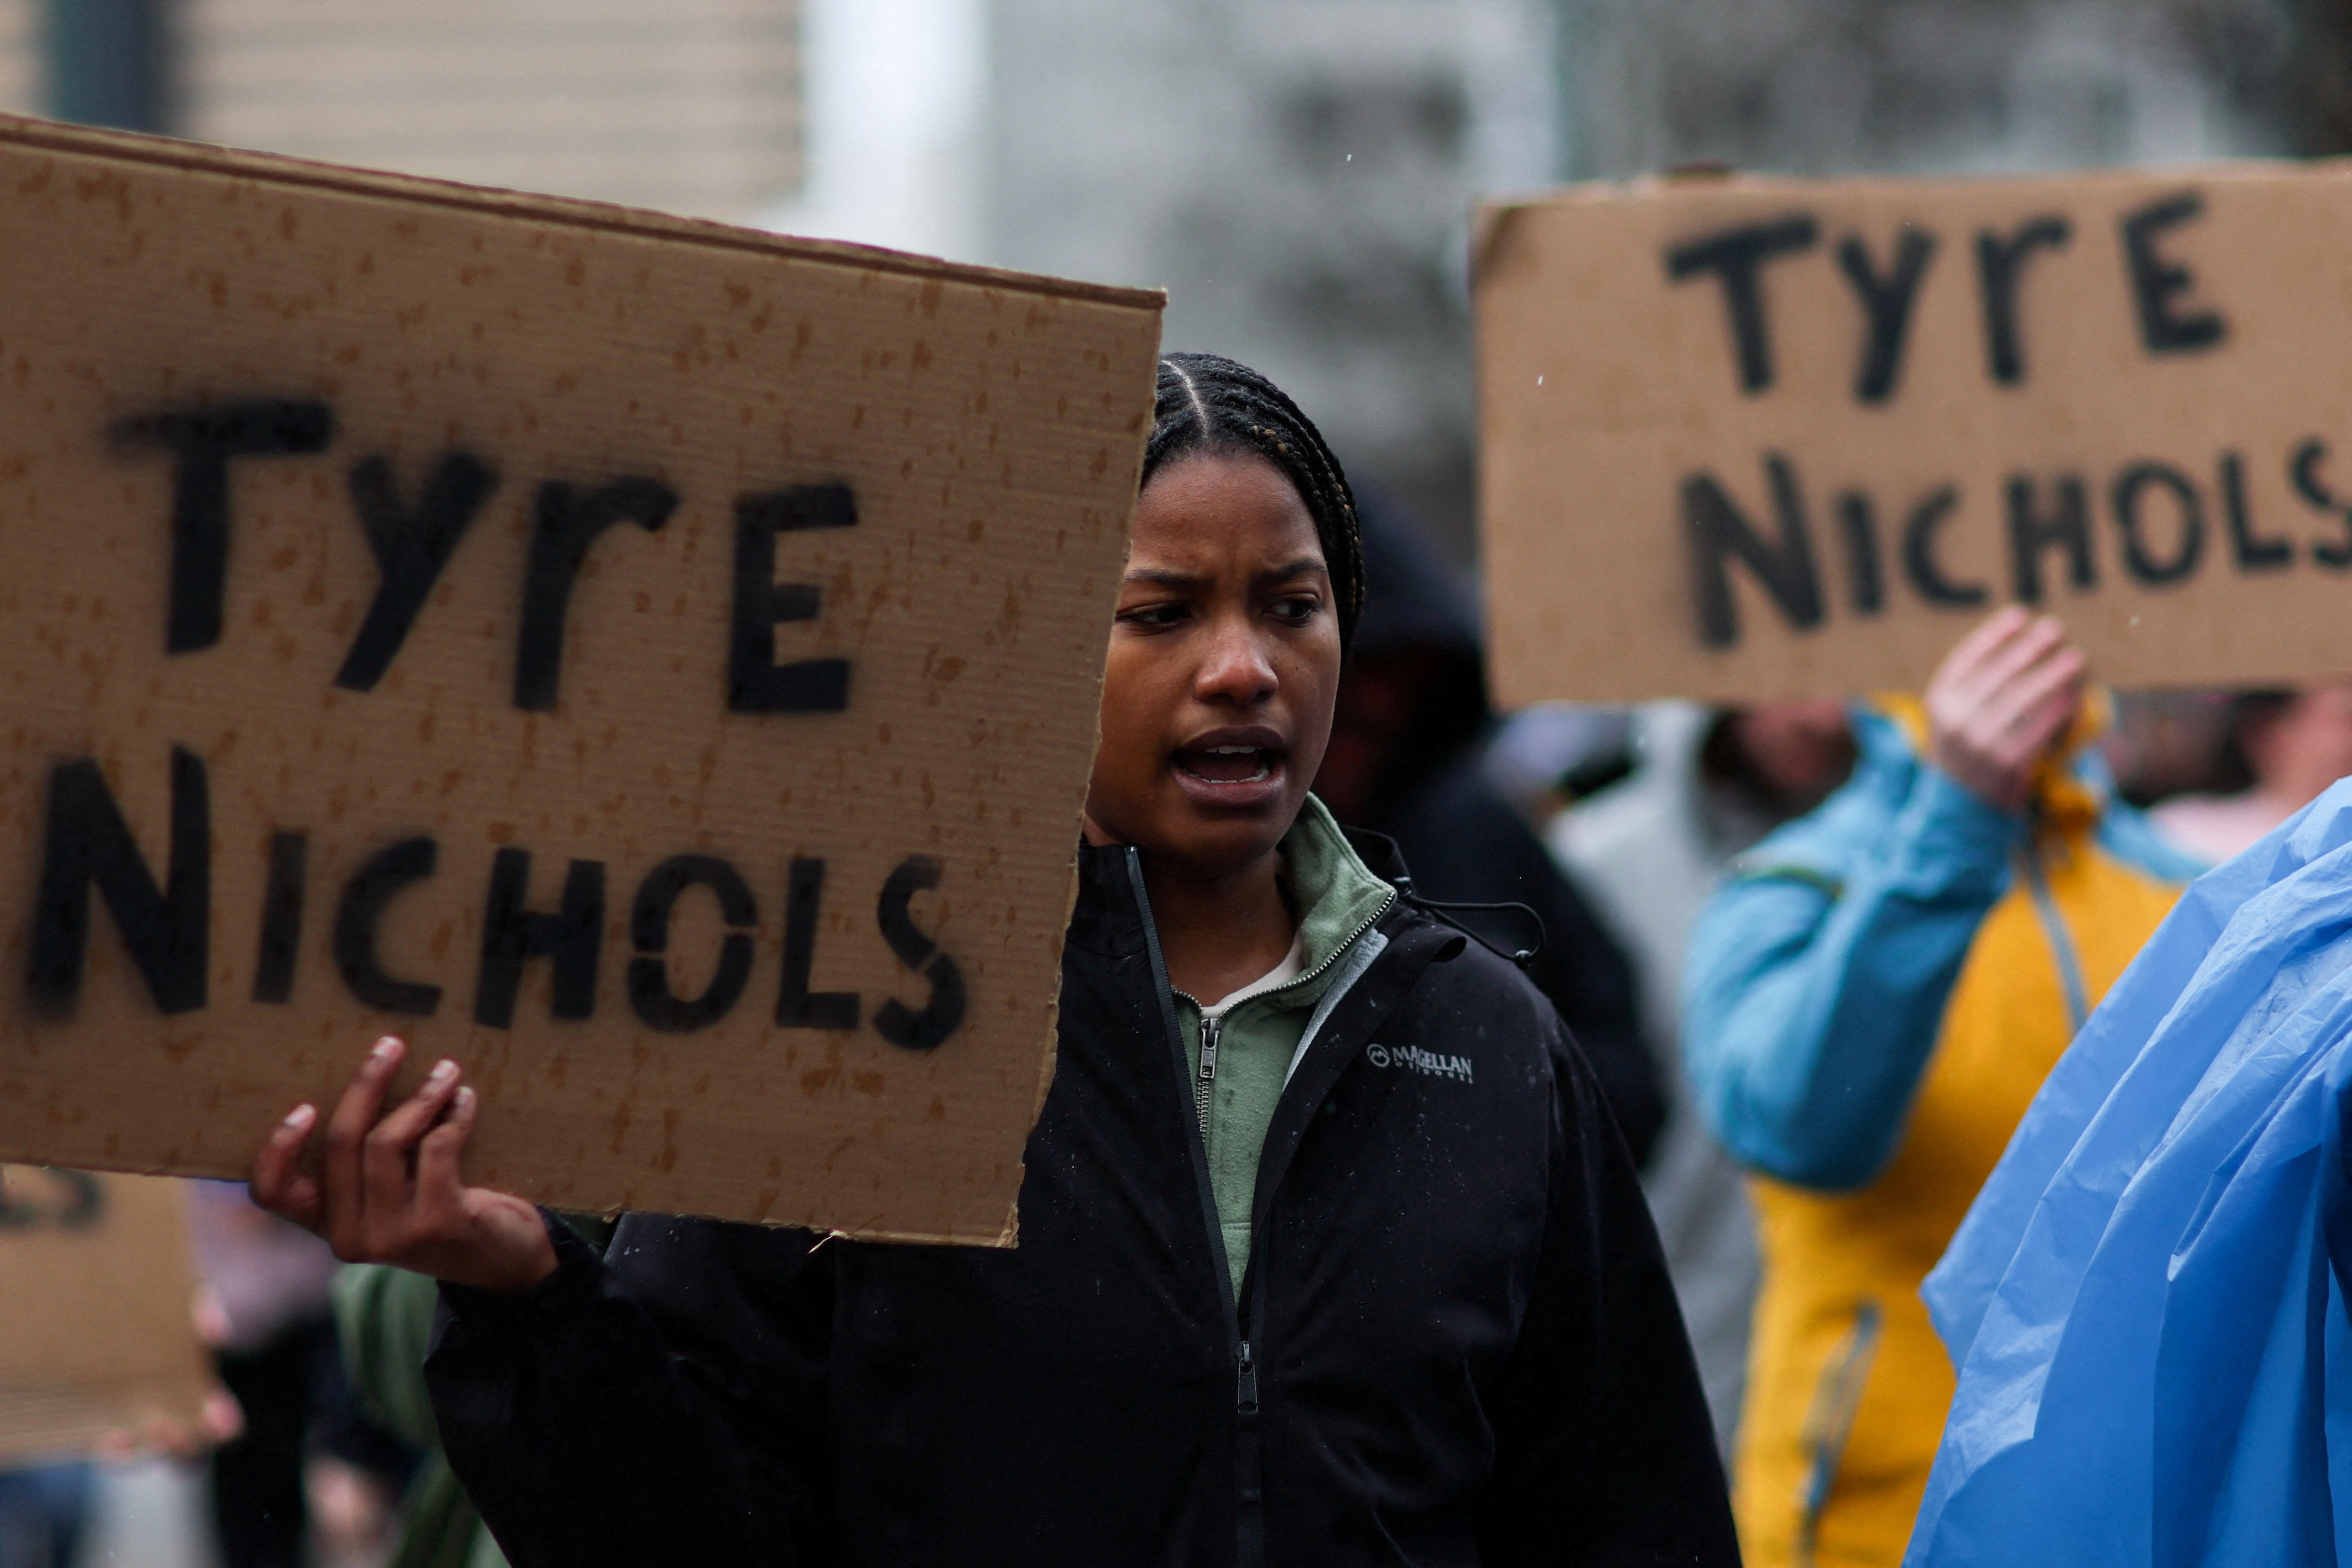 A woman holds up a cardboard sign that says TYRE NICHOLS.